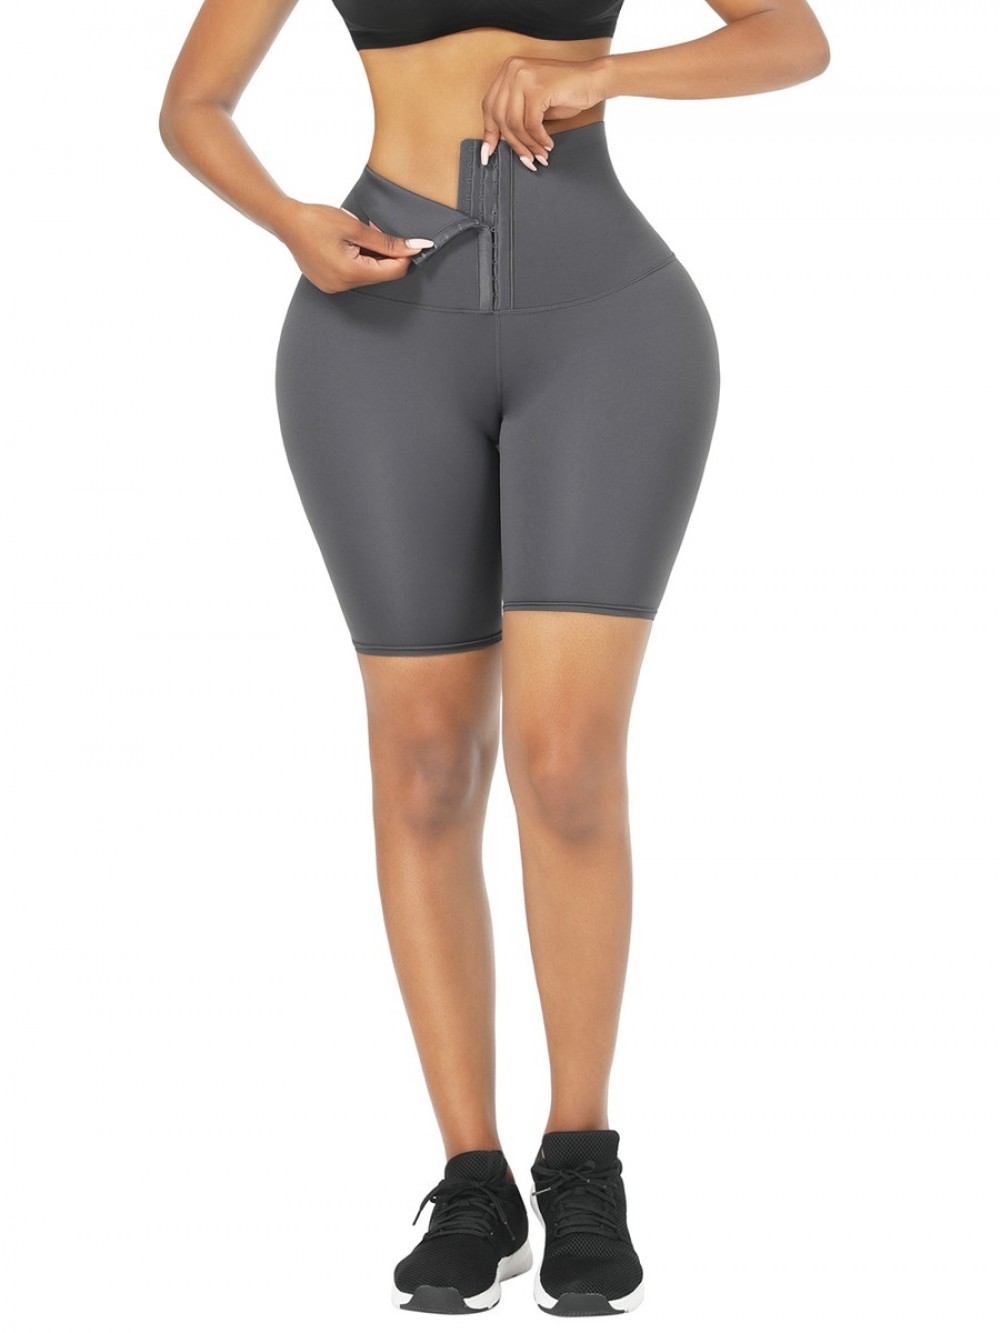 Gray 2-In-1 Tummy Control Waist Trainer Shorts Mid-Thigh Compression